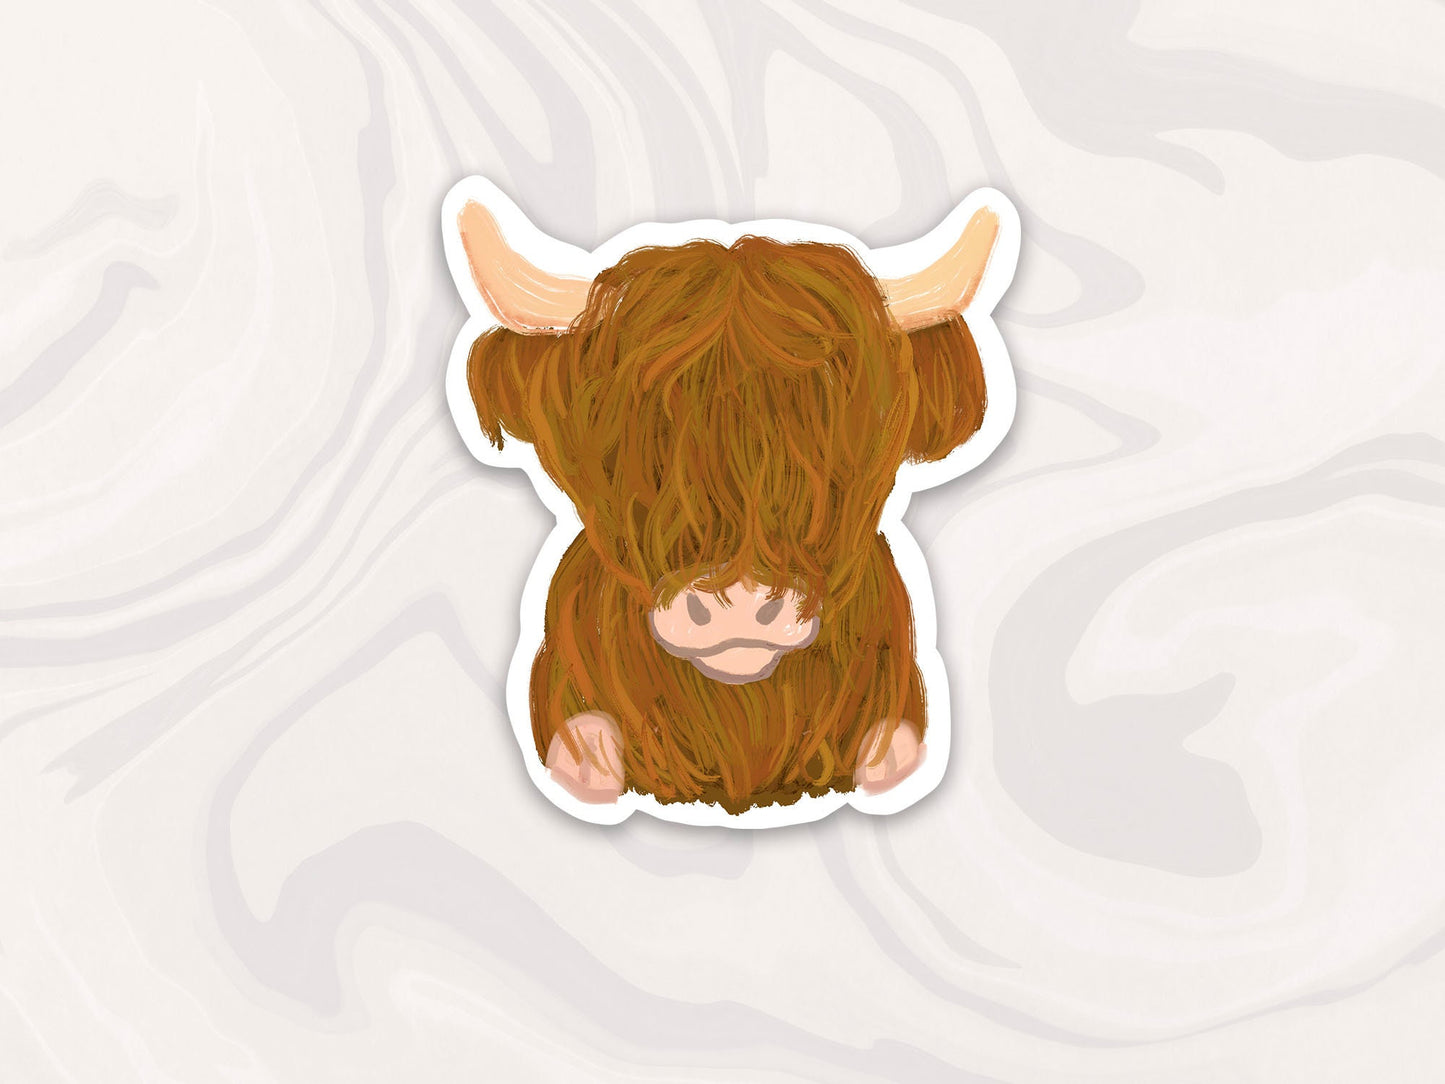 Highland Cow Sticker, Highland Cow Animal Decal, Cow Gift, Cow Accessories, Gift for Cow Lover, Cool Cow Sticker, Gift